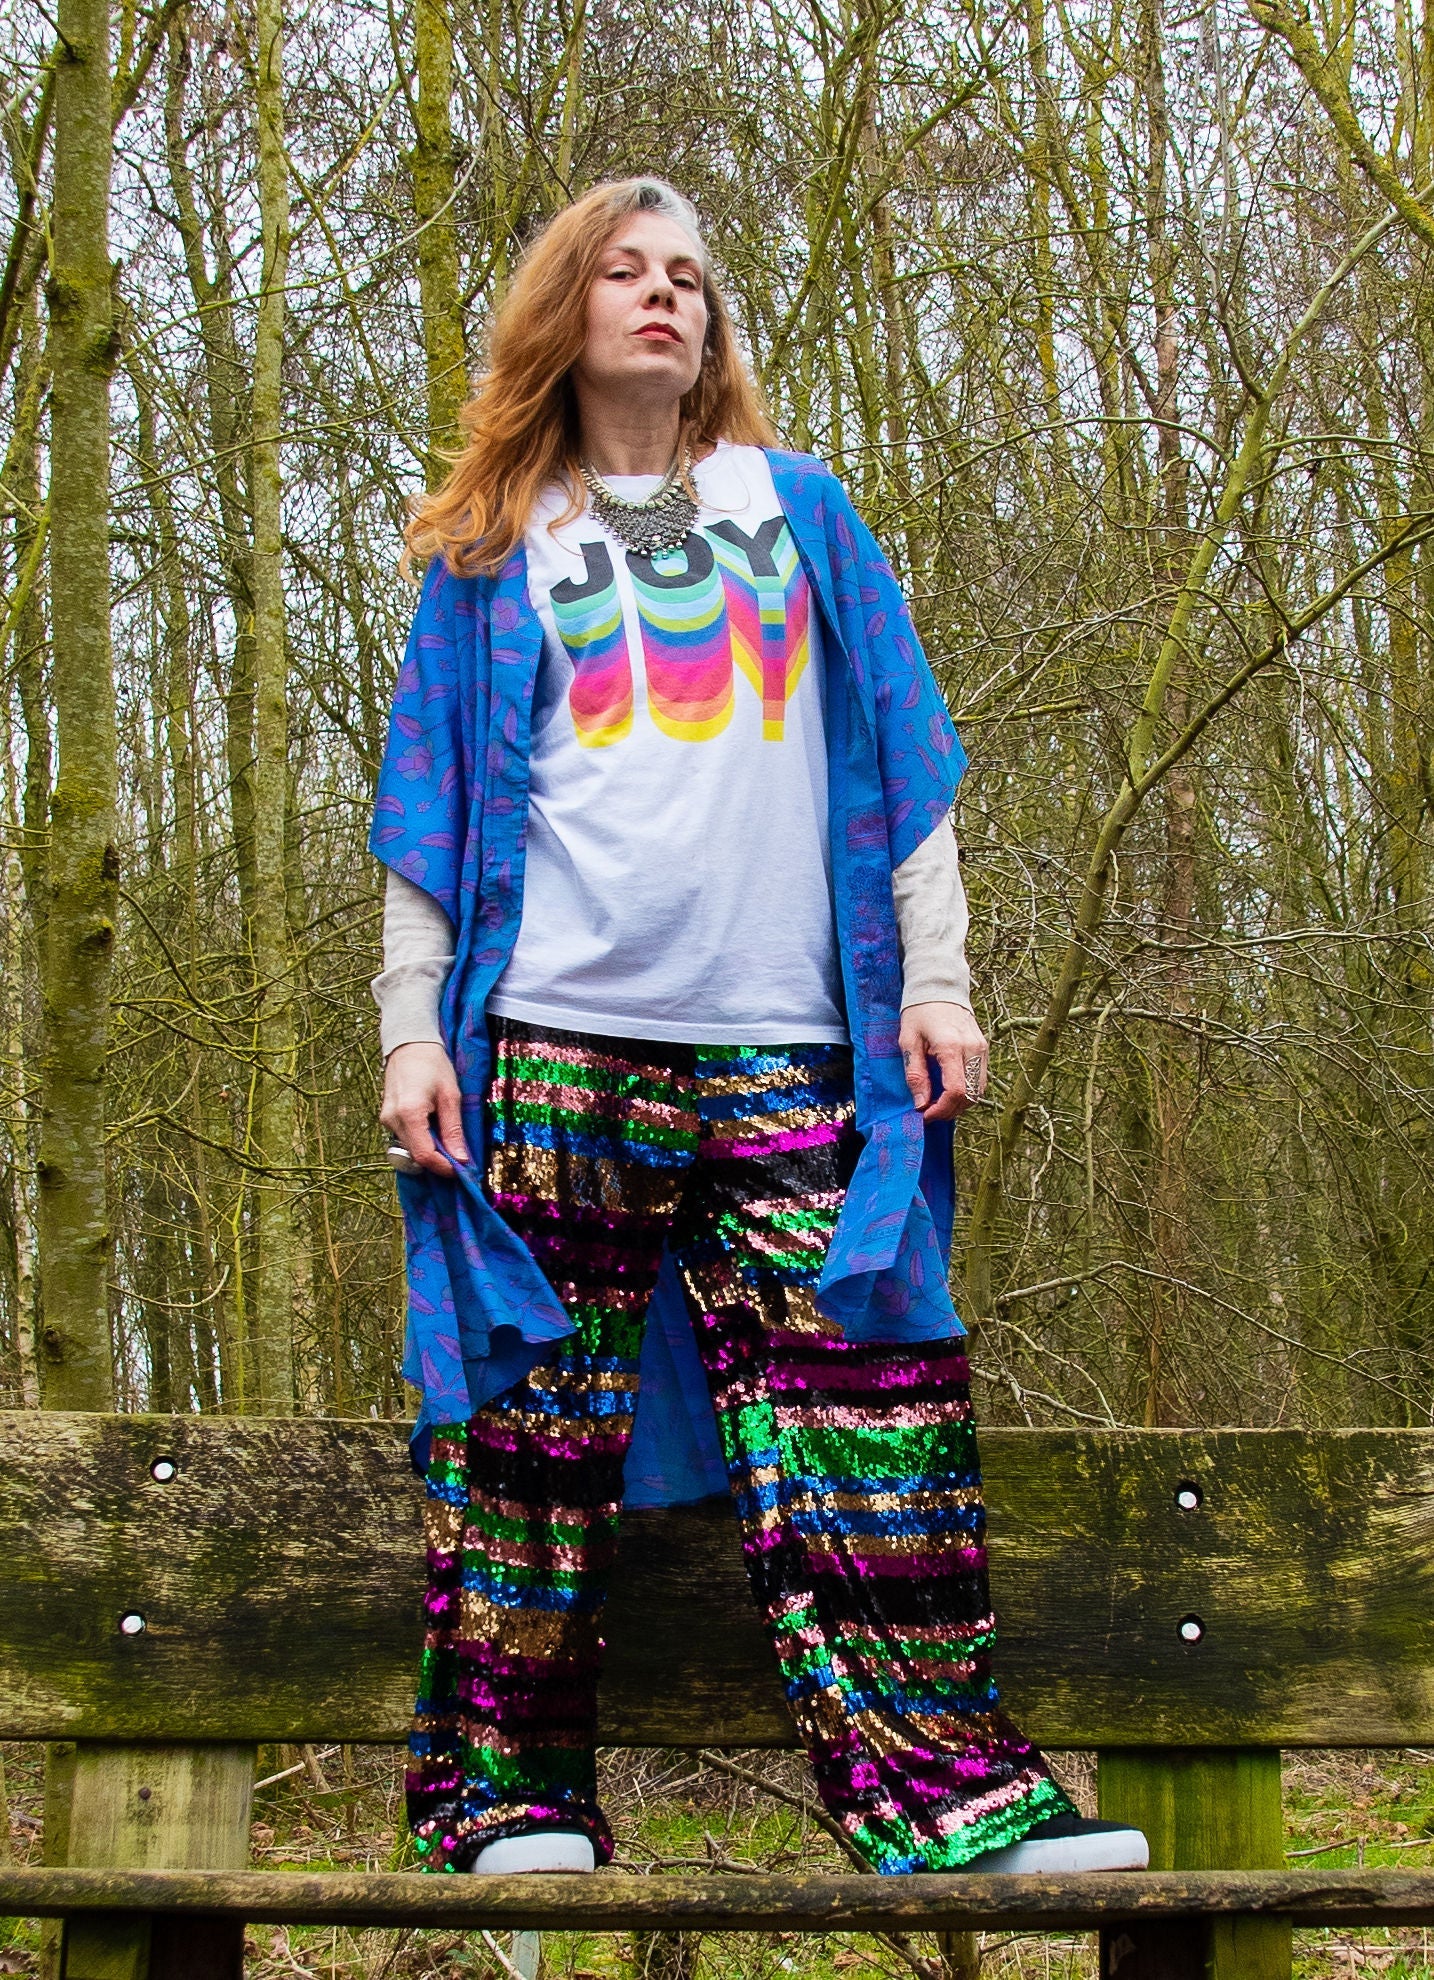 woman standing on bench wearing t shirt saying joy with sequin pants and neem wrap dress